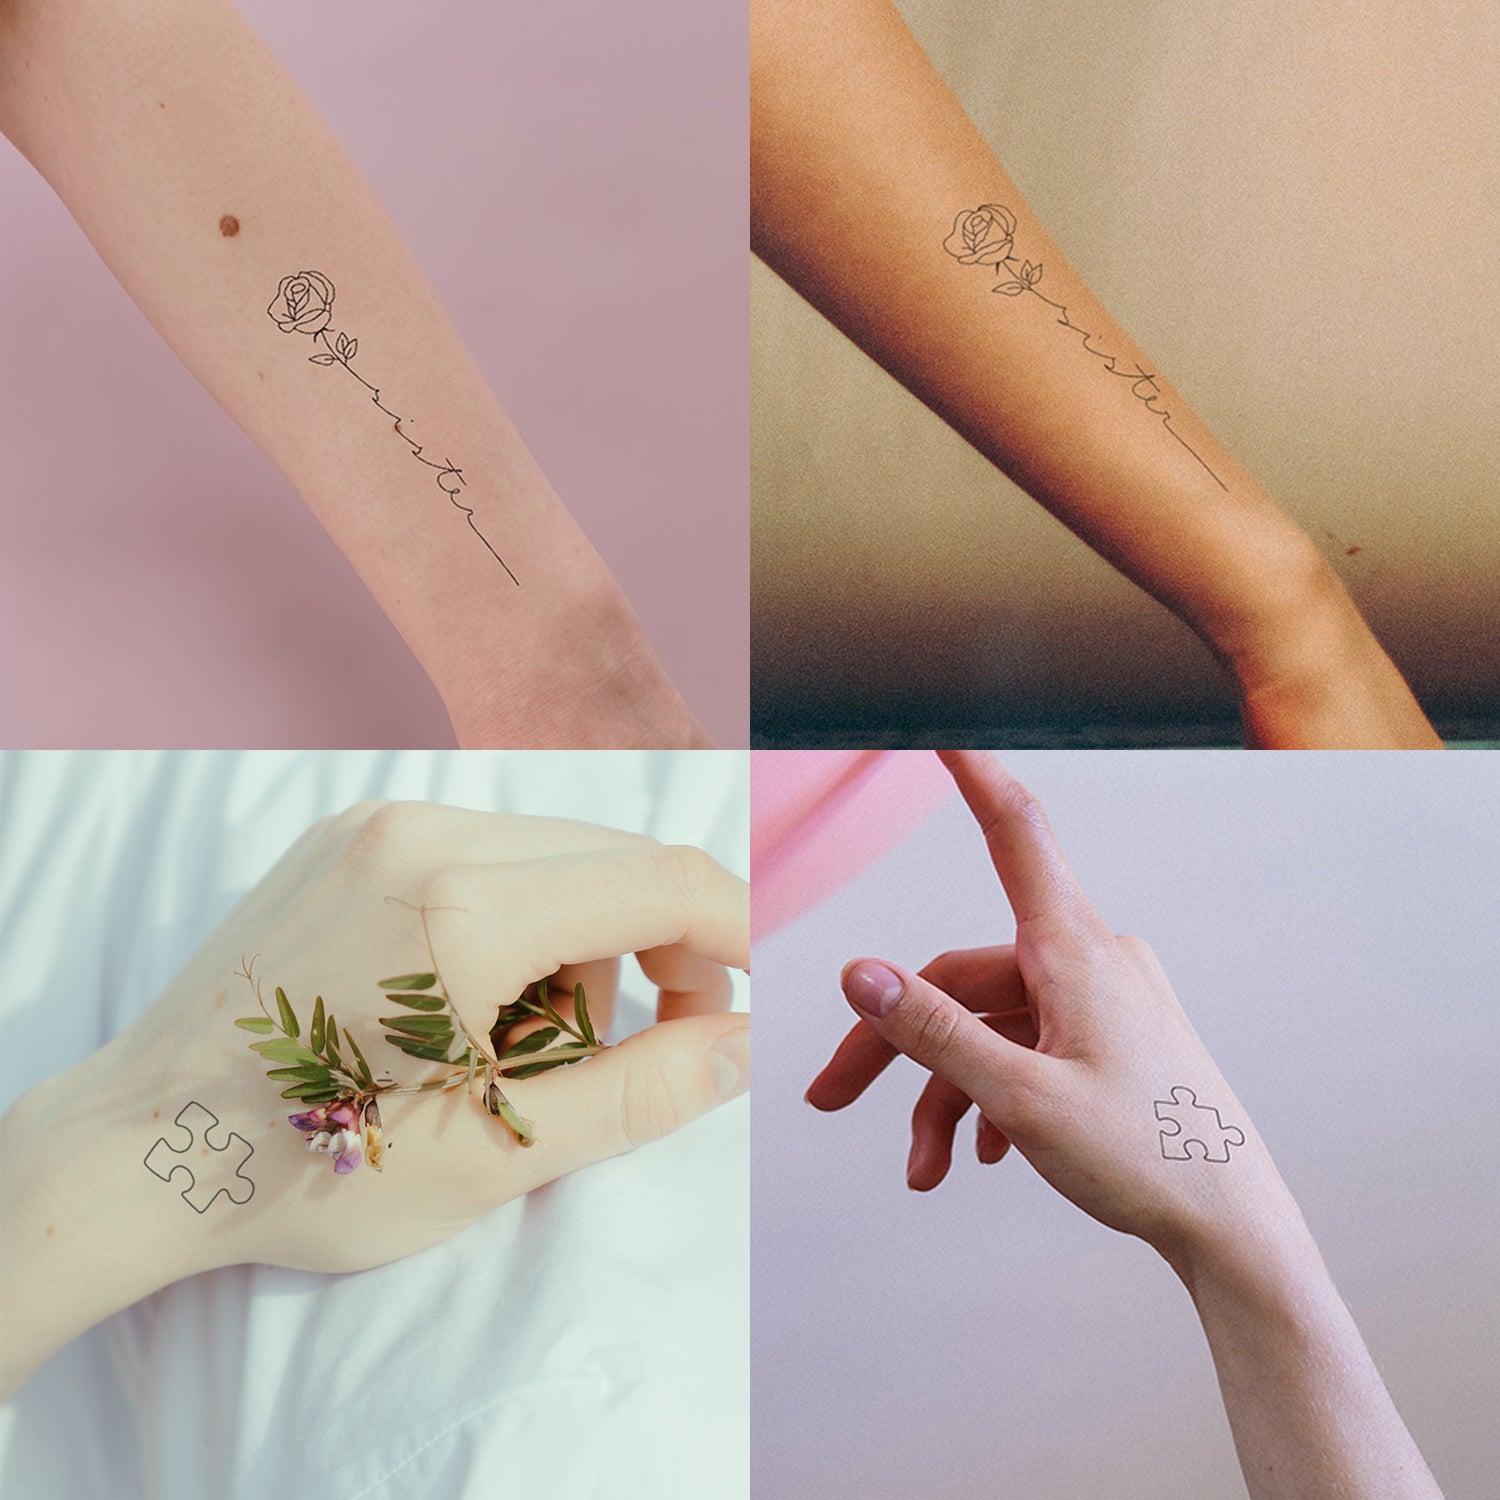 17 Tattoos Inspired by BTS That Only K-Pop Fans Will Understand